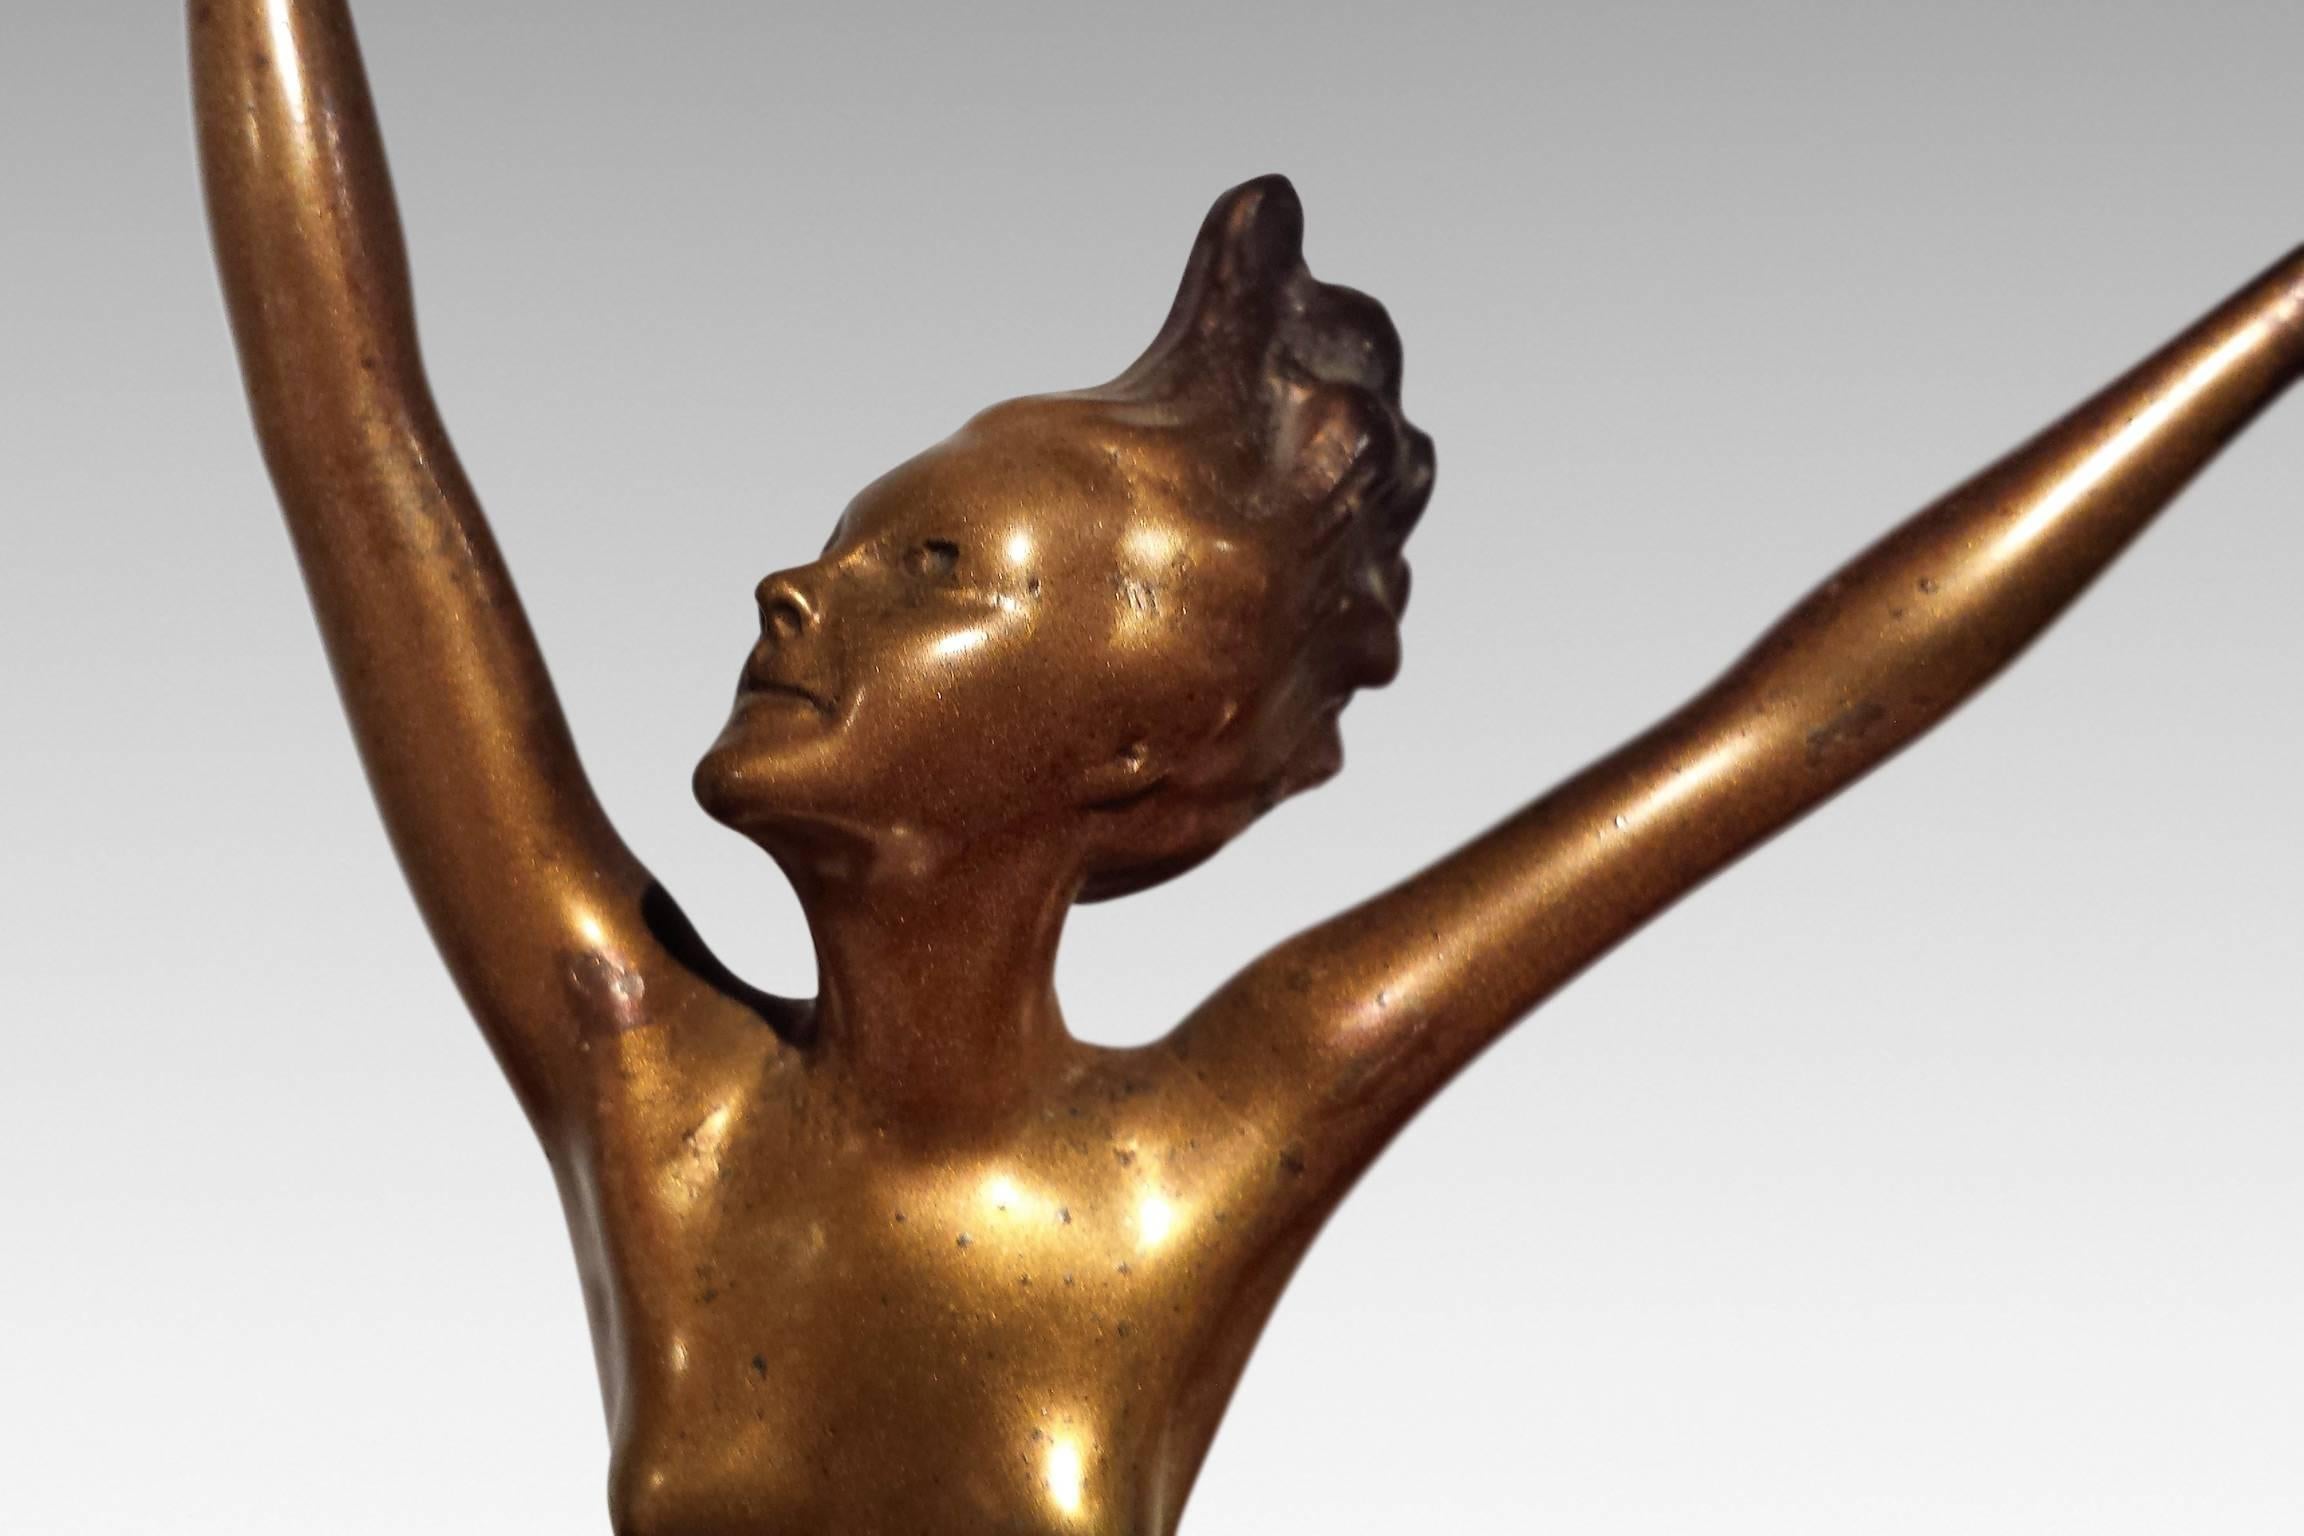 'Sophie', an original Art Deco bronze dancer by Joseph Adolph. 
Adolph was an Austrian designer who created exuberant, aerodynamic figurines between 1910 and 1939. Excellent condition. Signed.